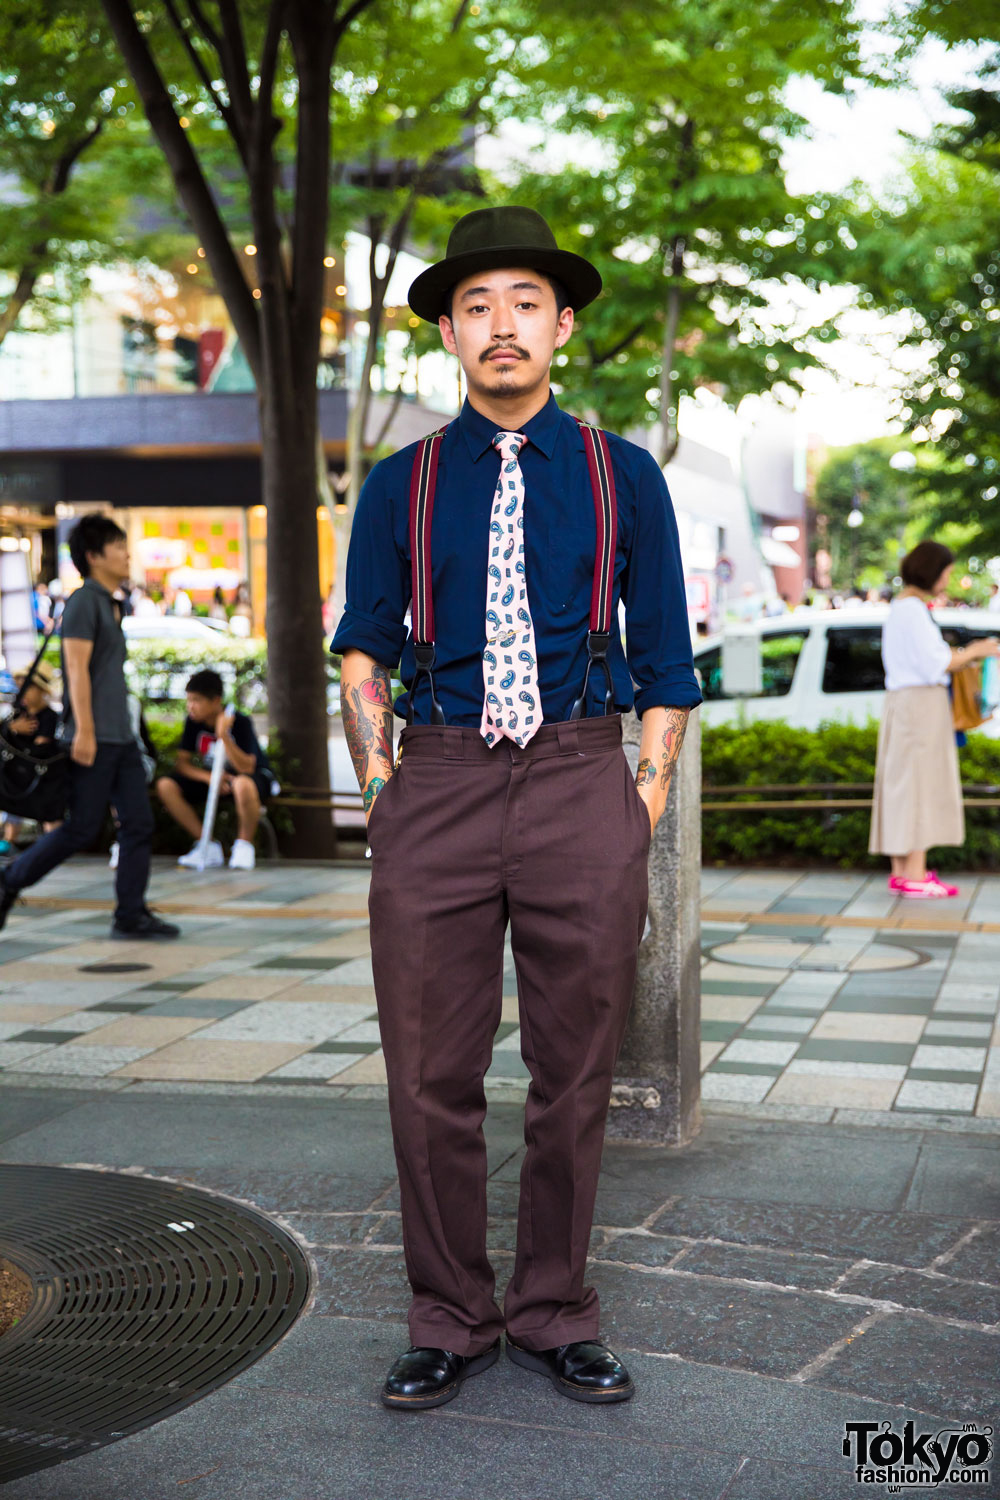 Japanese Barber in Dapper Harajuku Street Style w/ Hat, Suspenders, Dress Shoes & Tattoos